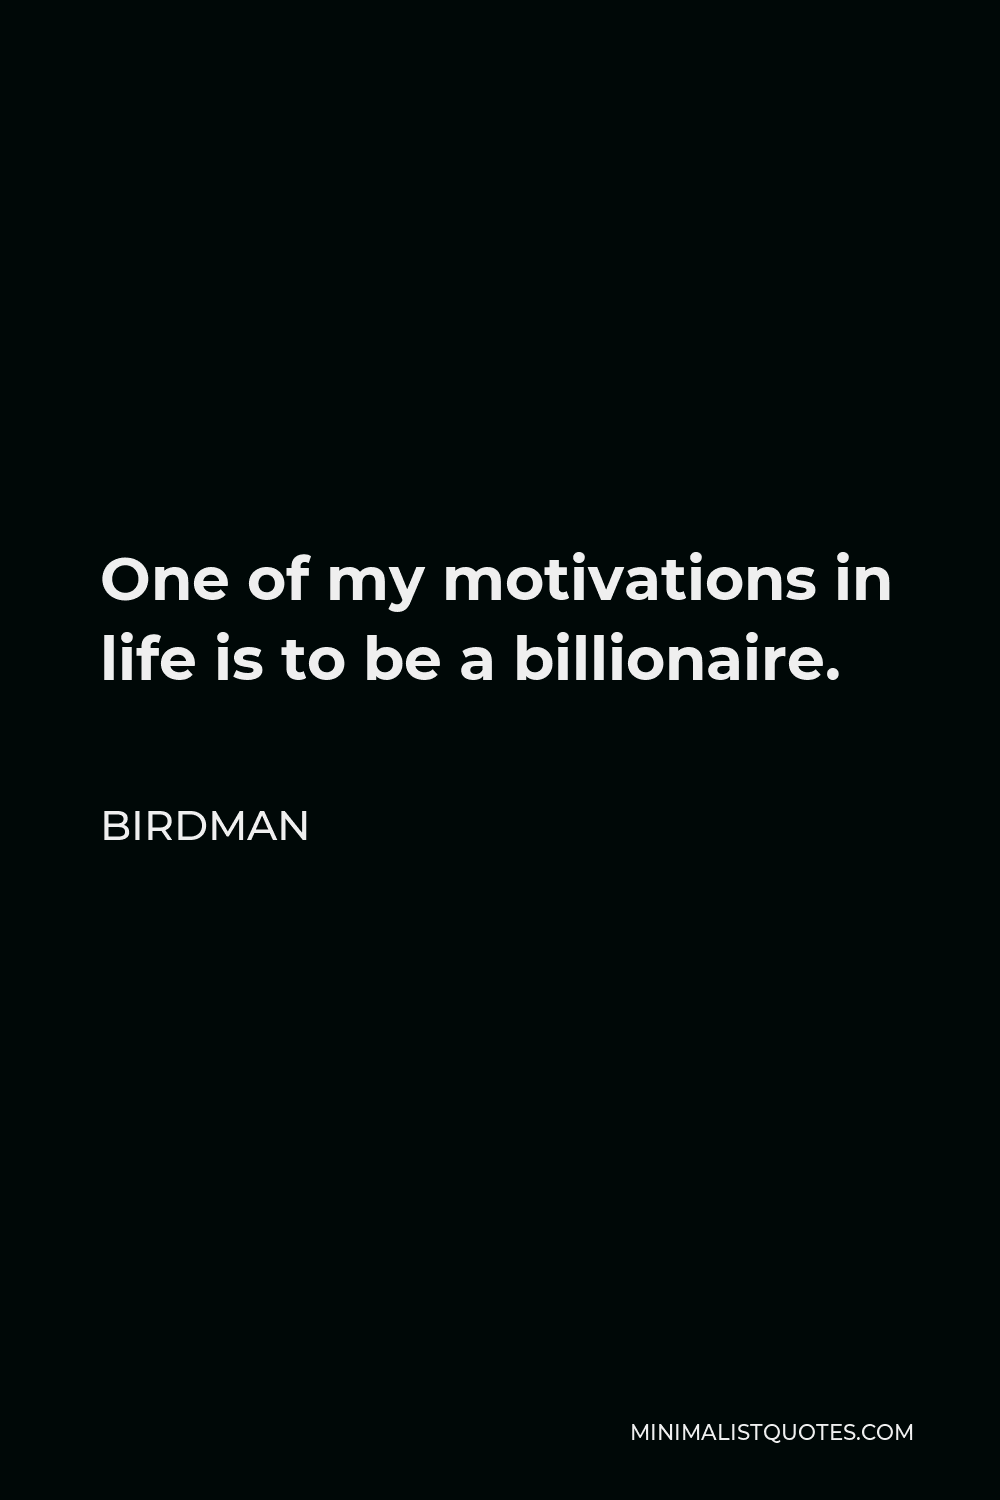 Birdman Quote - One of my motivations in life is to be a billionaire.